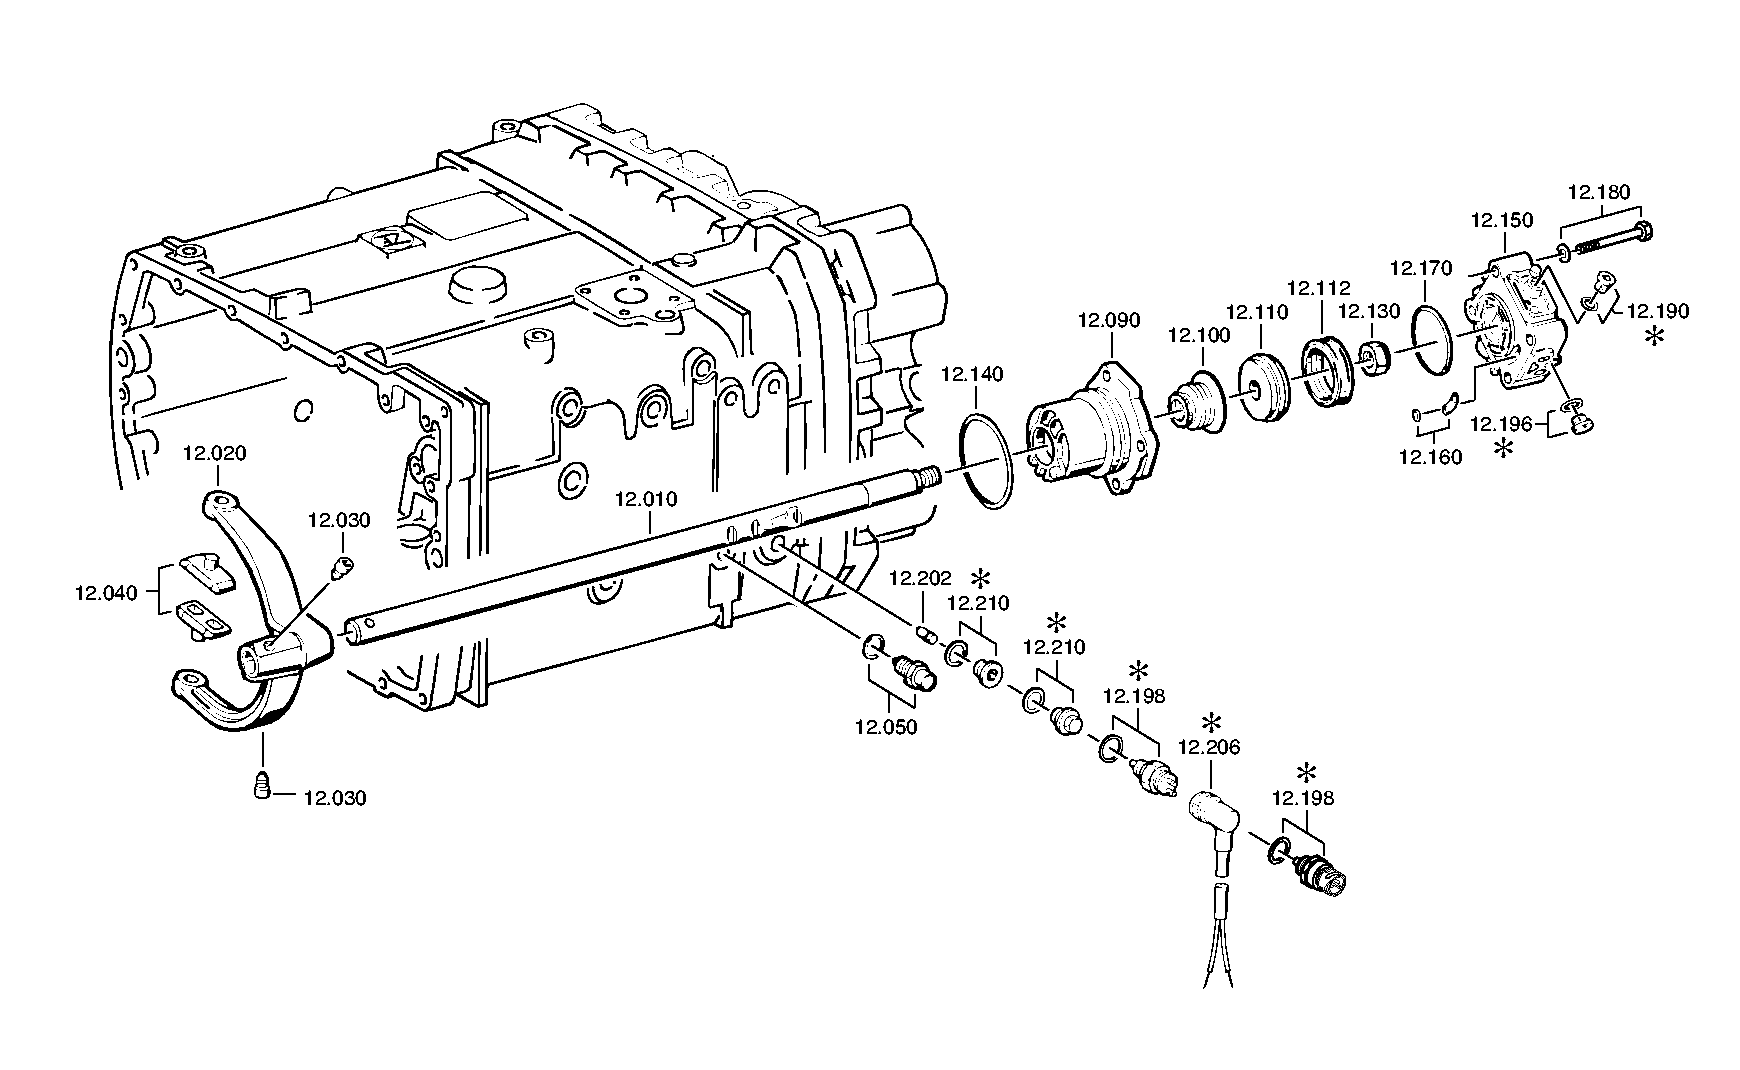 drawing for DAF 692684 - 5/2 WAY VALVE (figure 1)